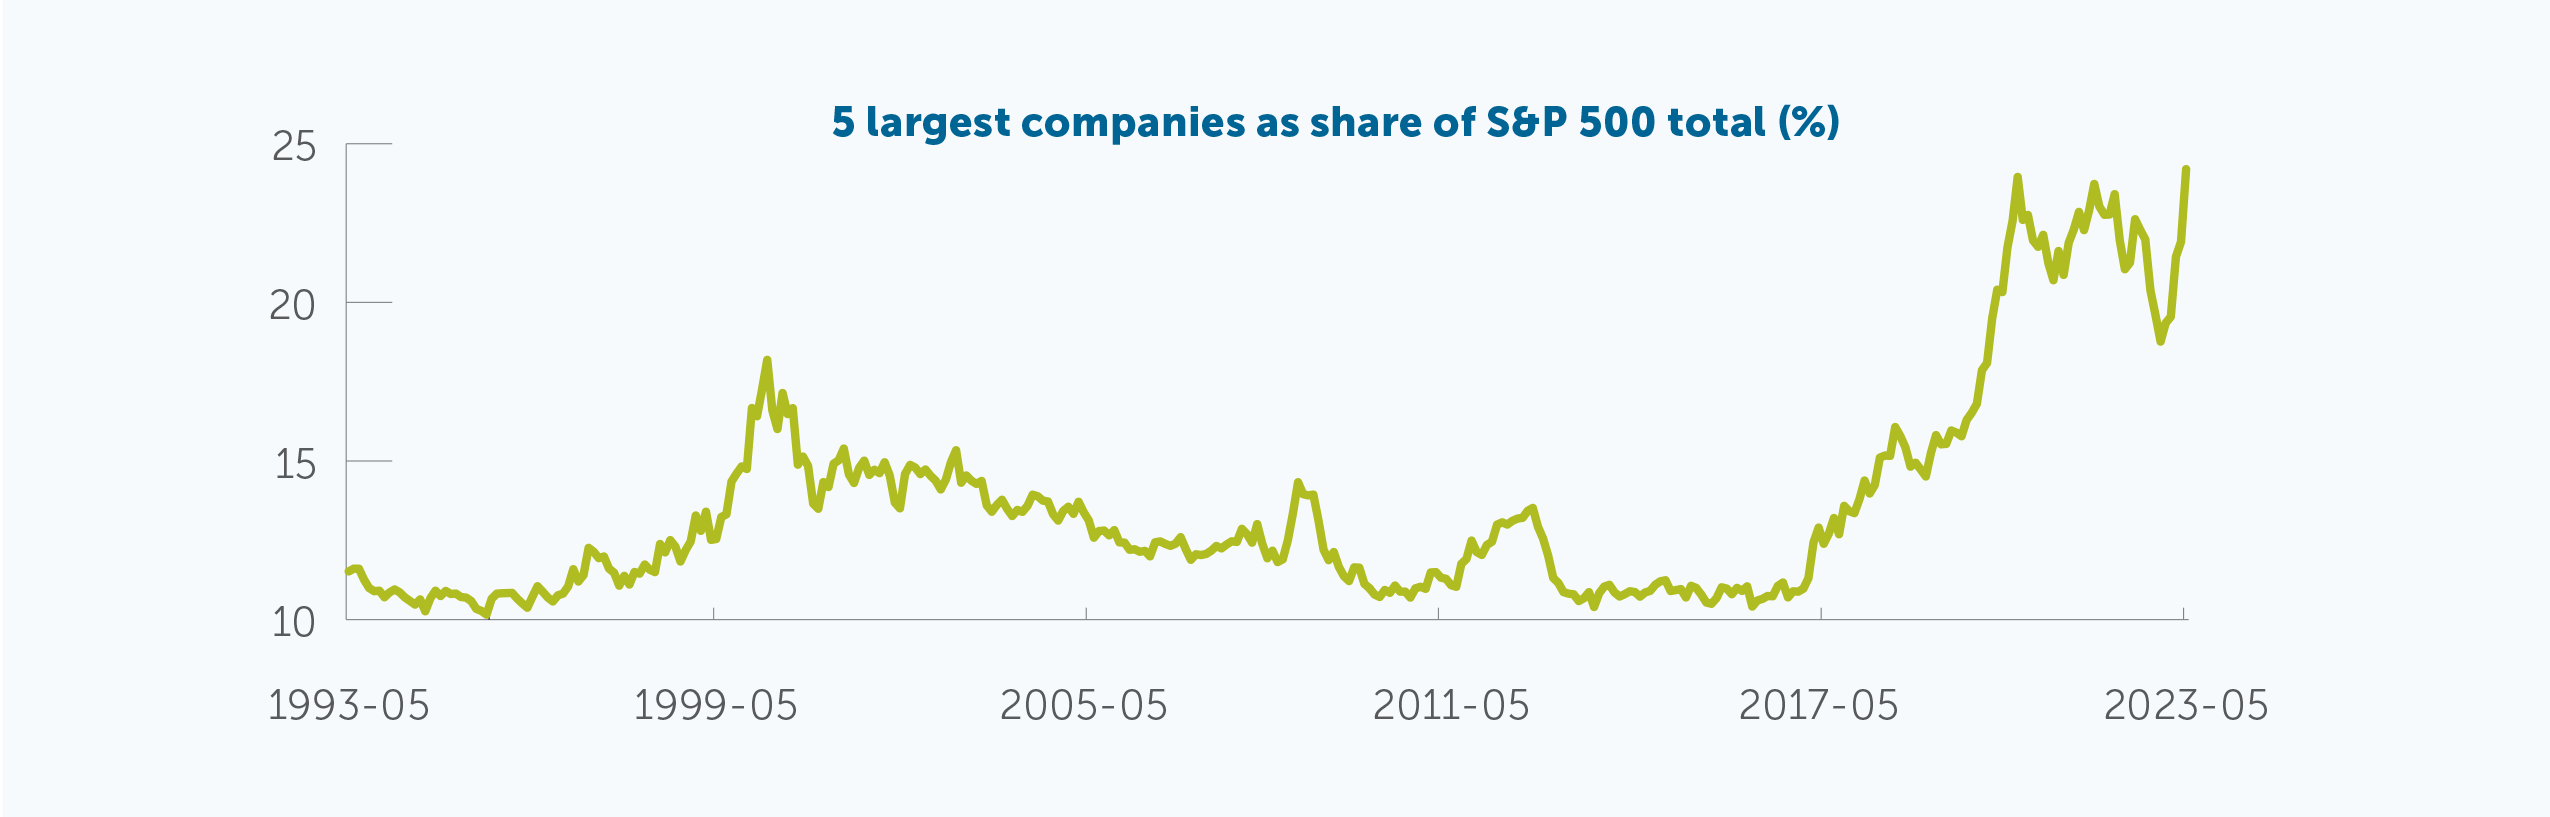 5 largest companies as share of S&P 500 total (%)